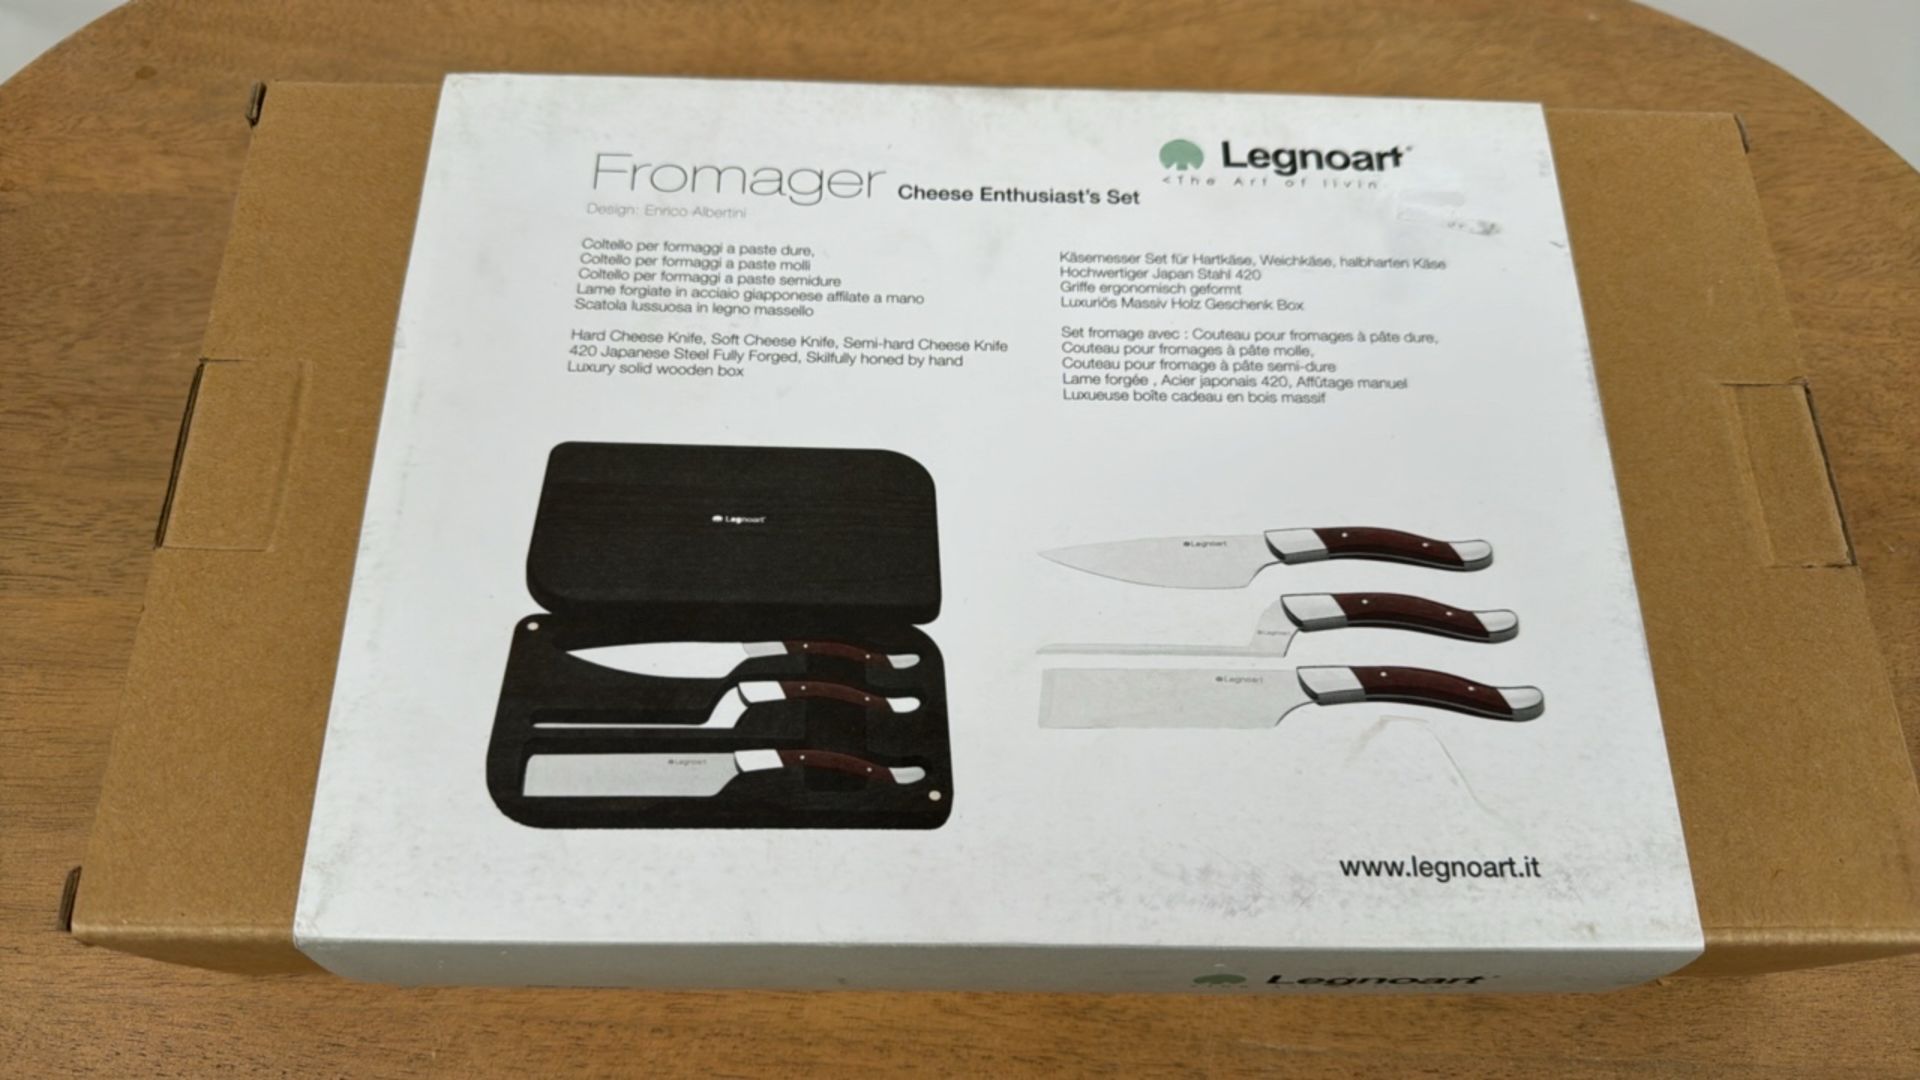 Legnoart Fromager Cheese Enthusiast Set - Image 2 of 5